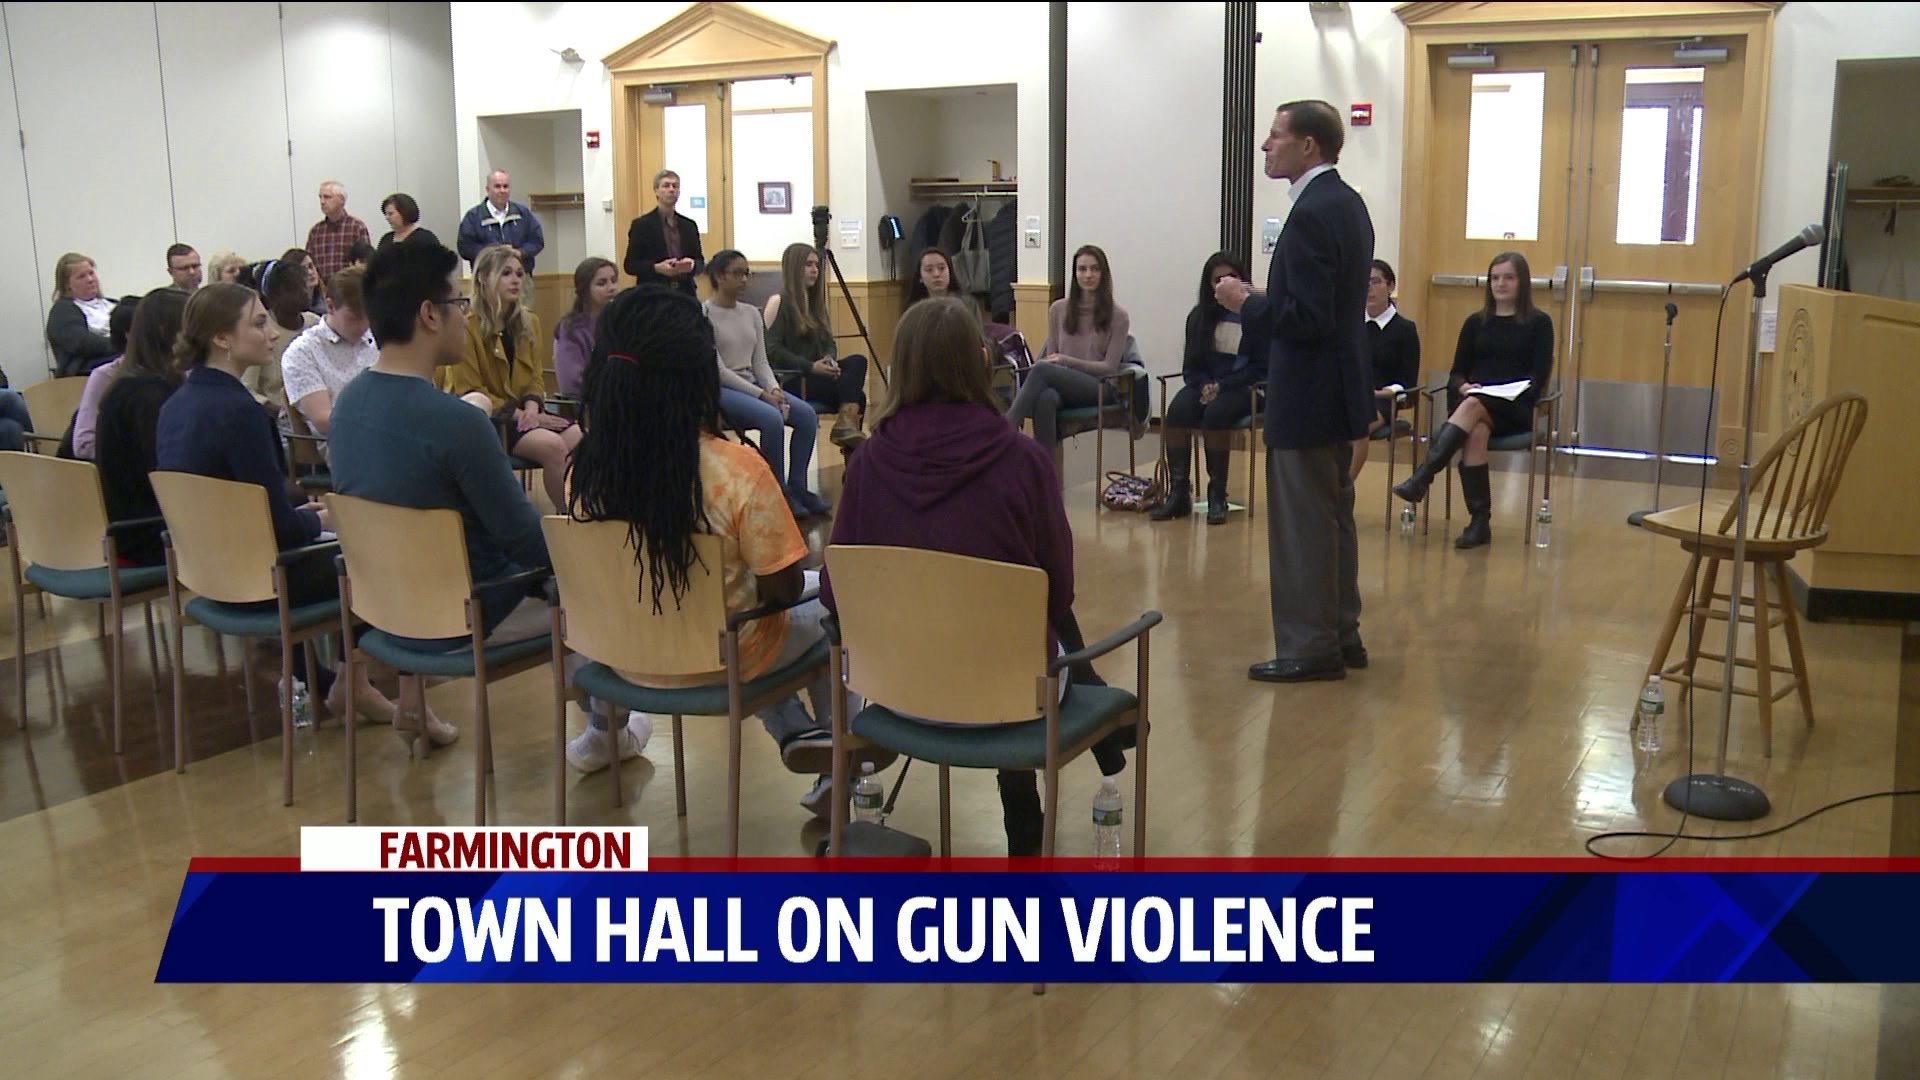 Blumenthal Talks to students about gun violence